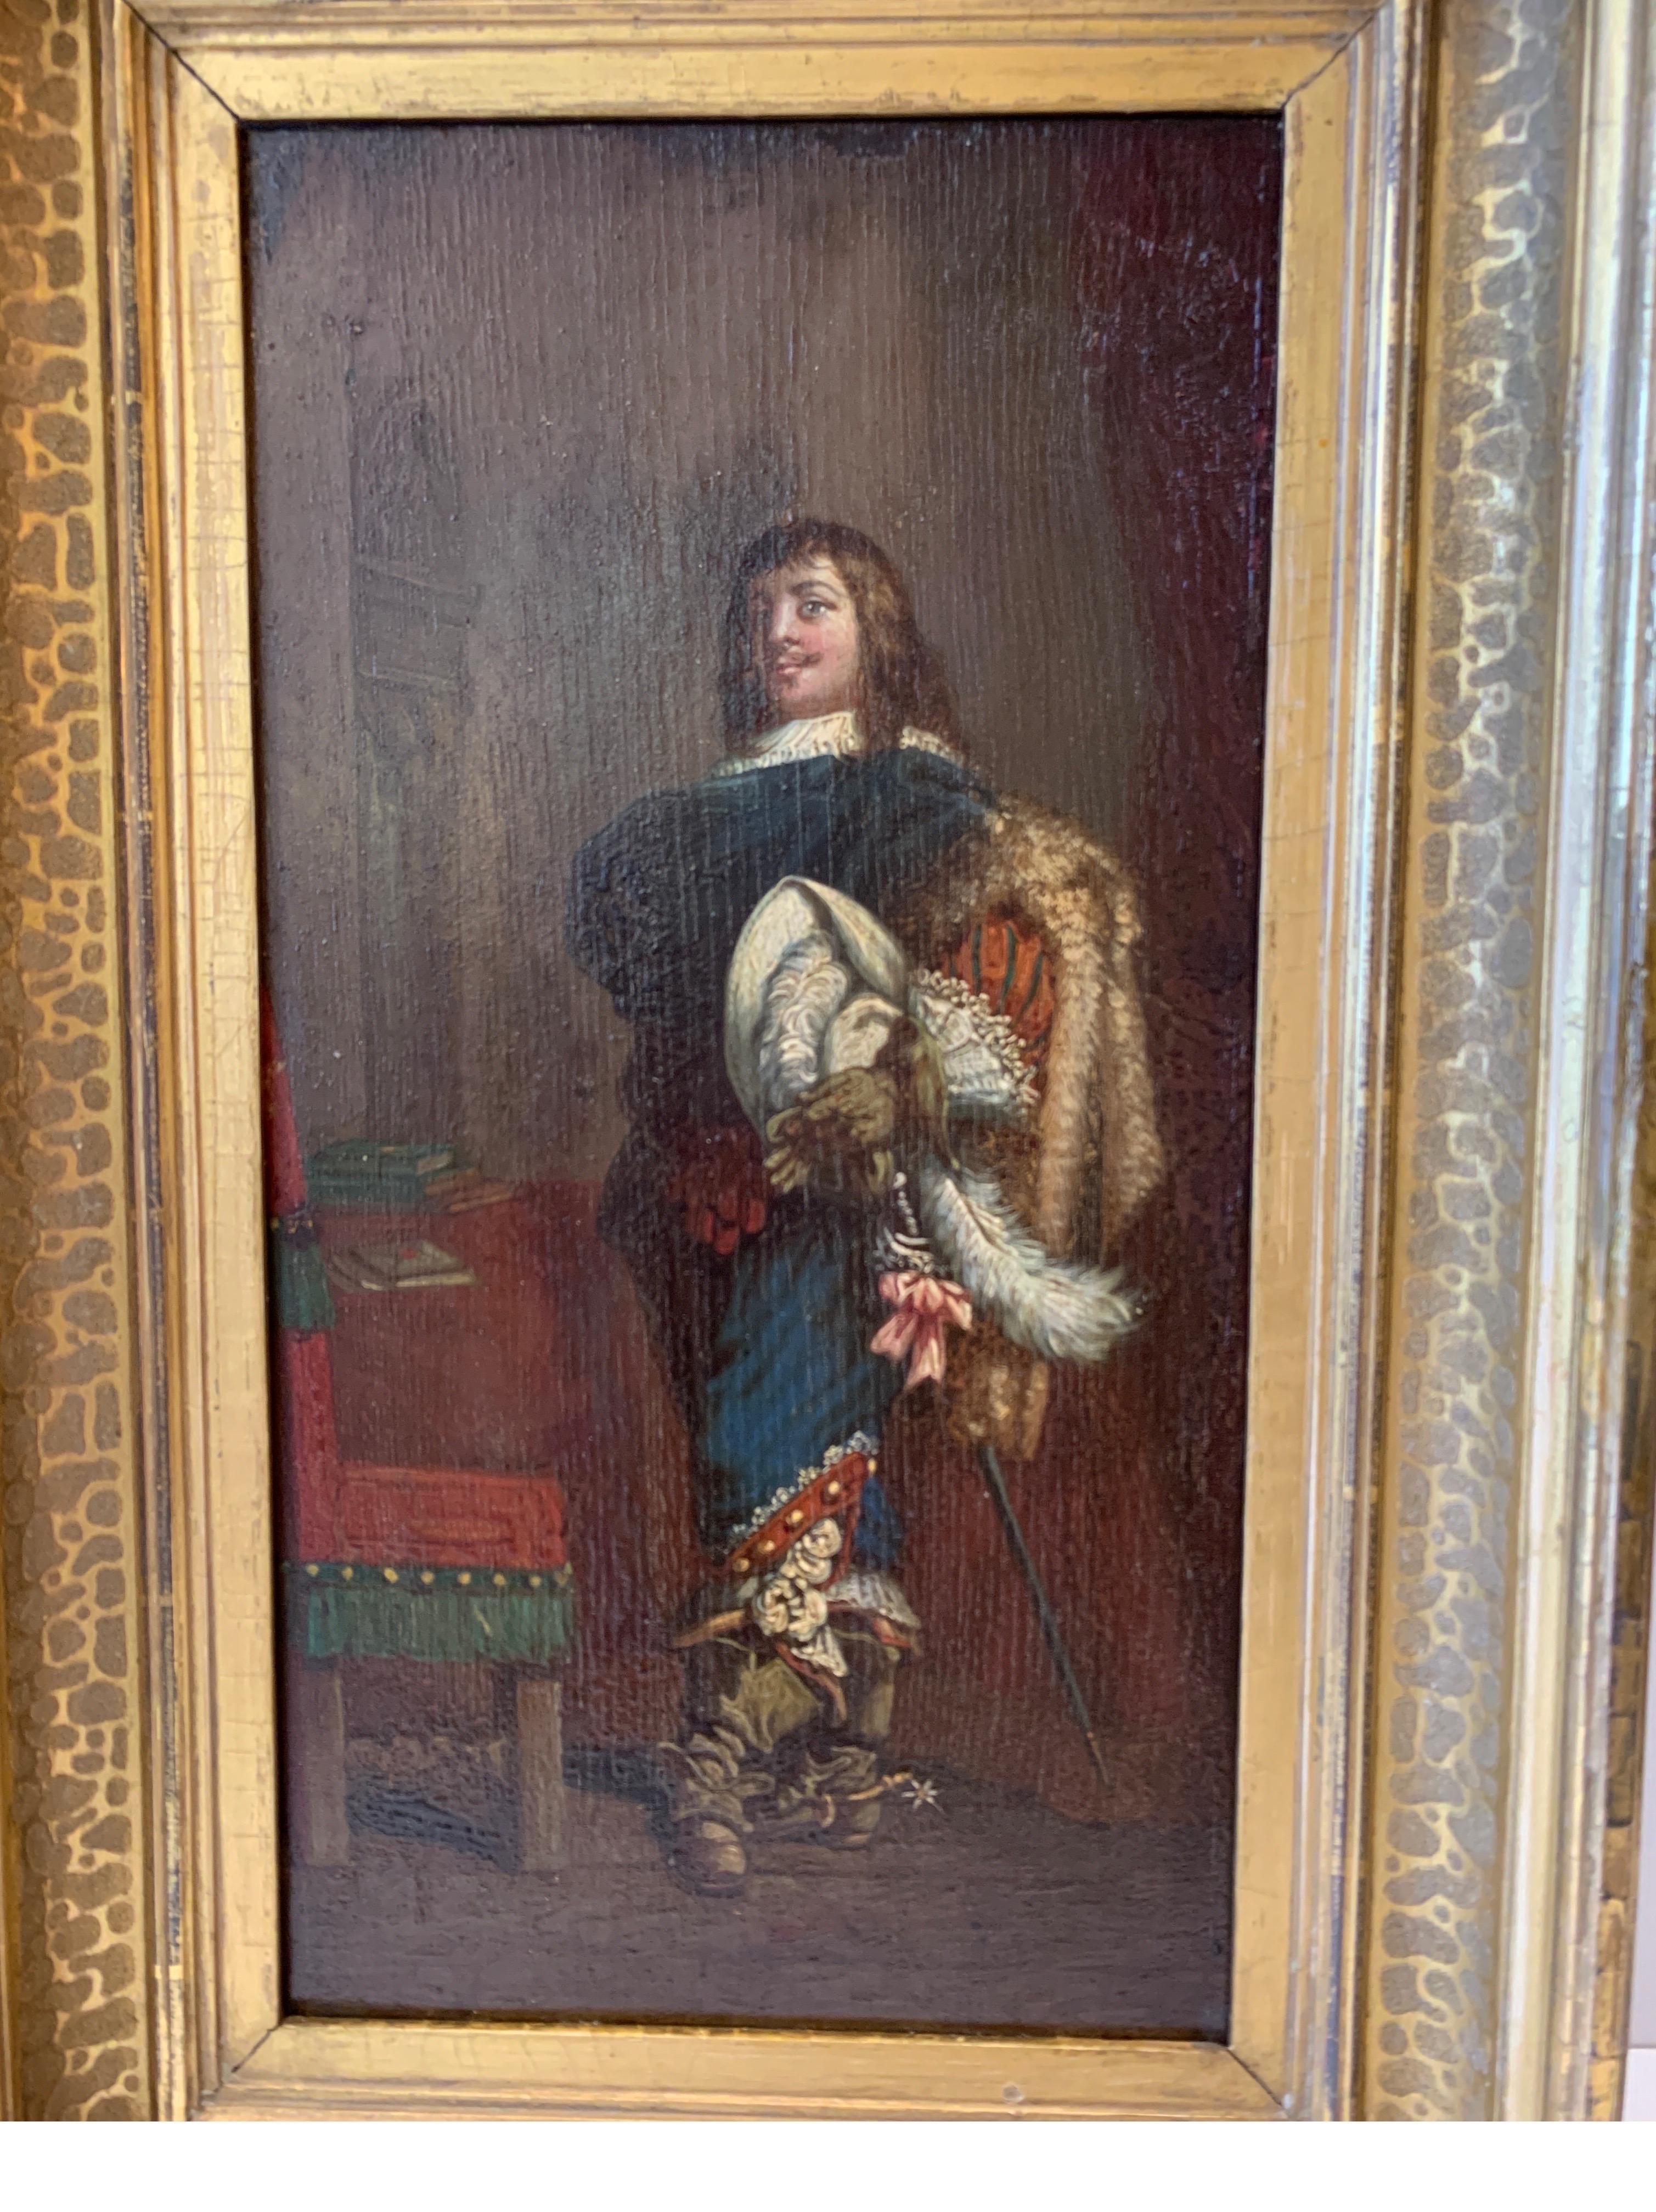 A cavalier oil painting on paper applied to wood in a giltwood frame, circa 1850.
Dressed in a hat, boots and a sword in a nice vintage frame. nice painting for an office, library, study or man cave. Unsigned.
Dimensions: 14